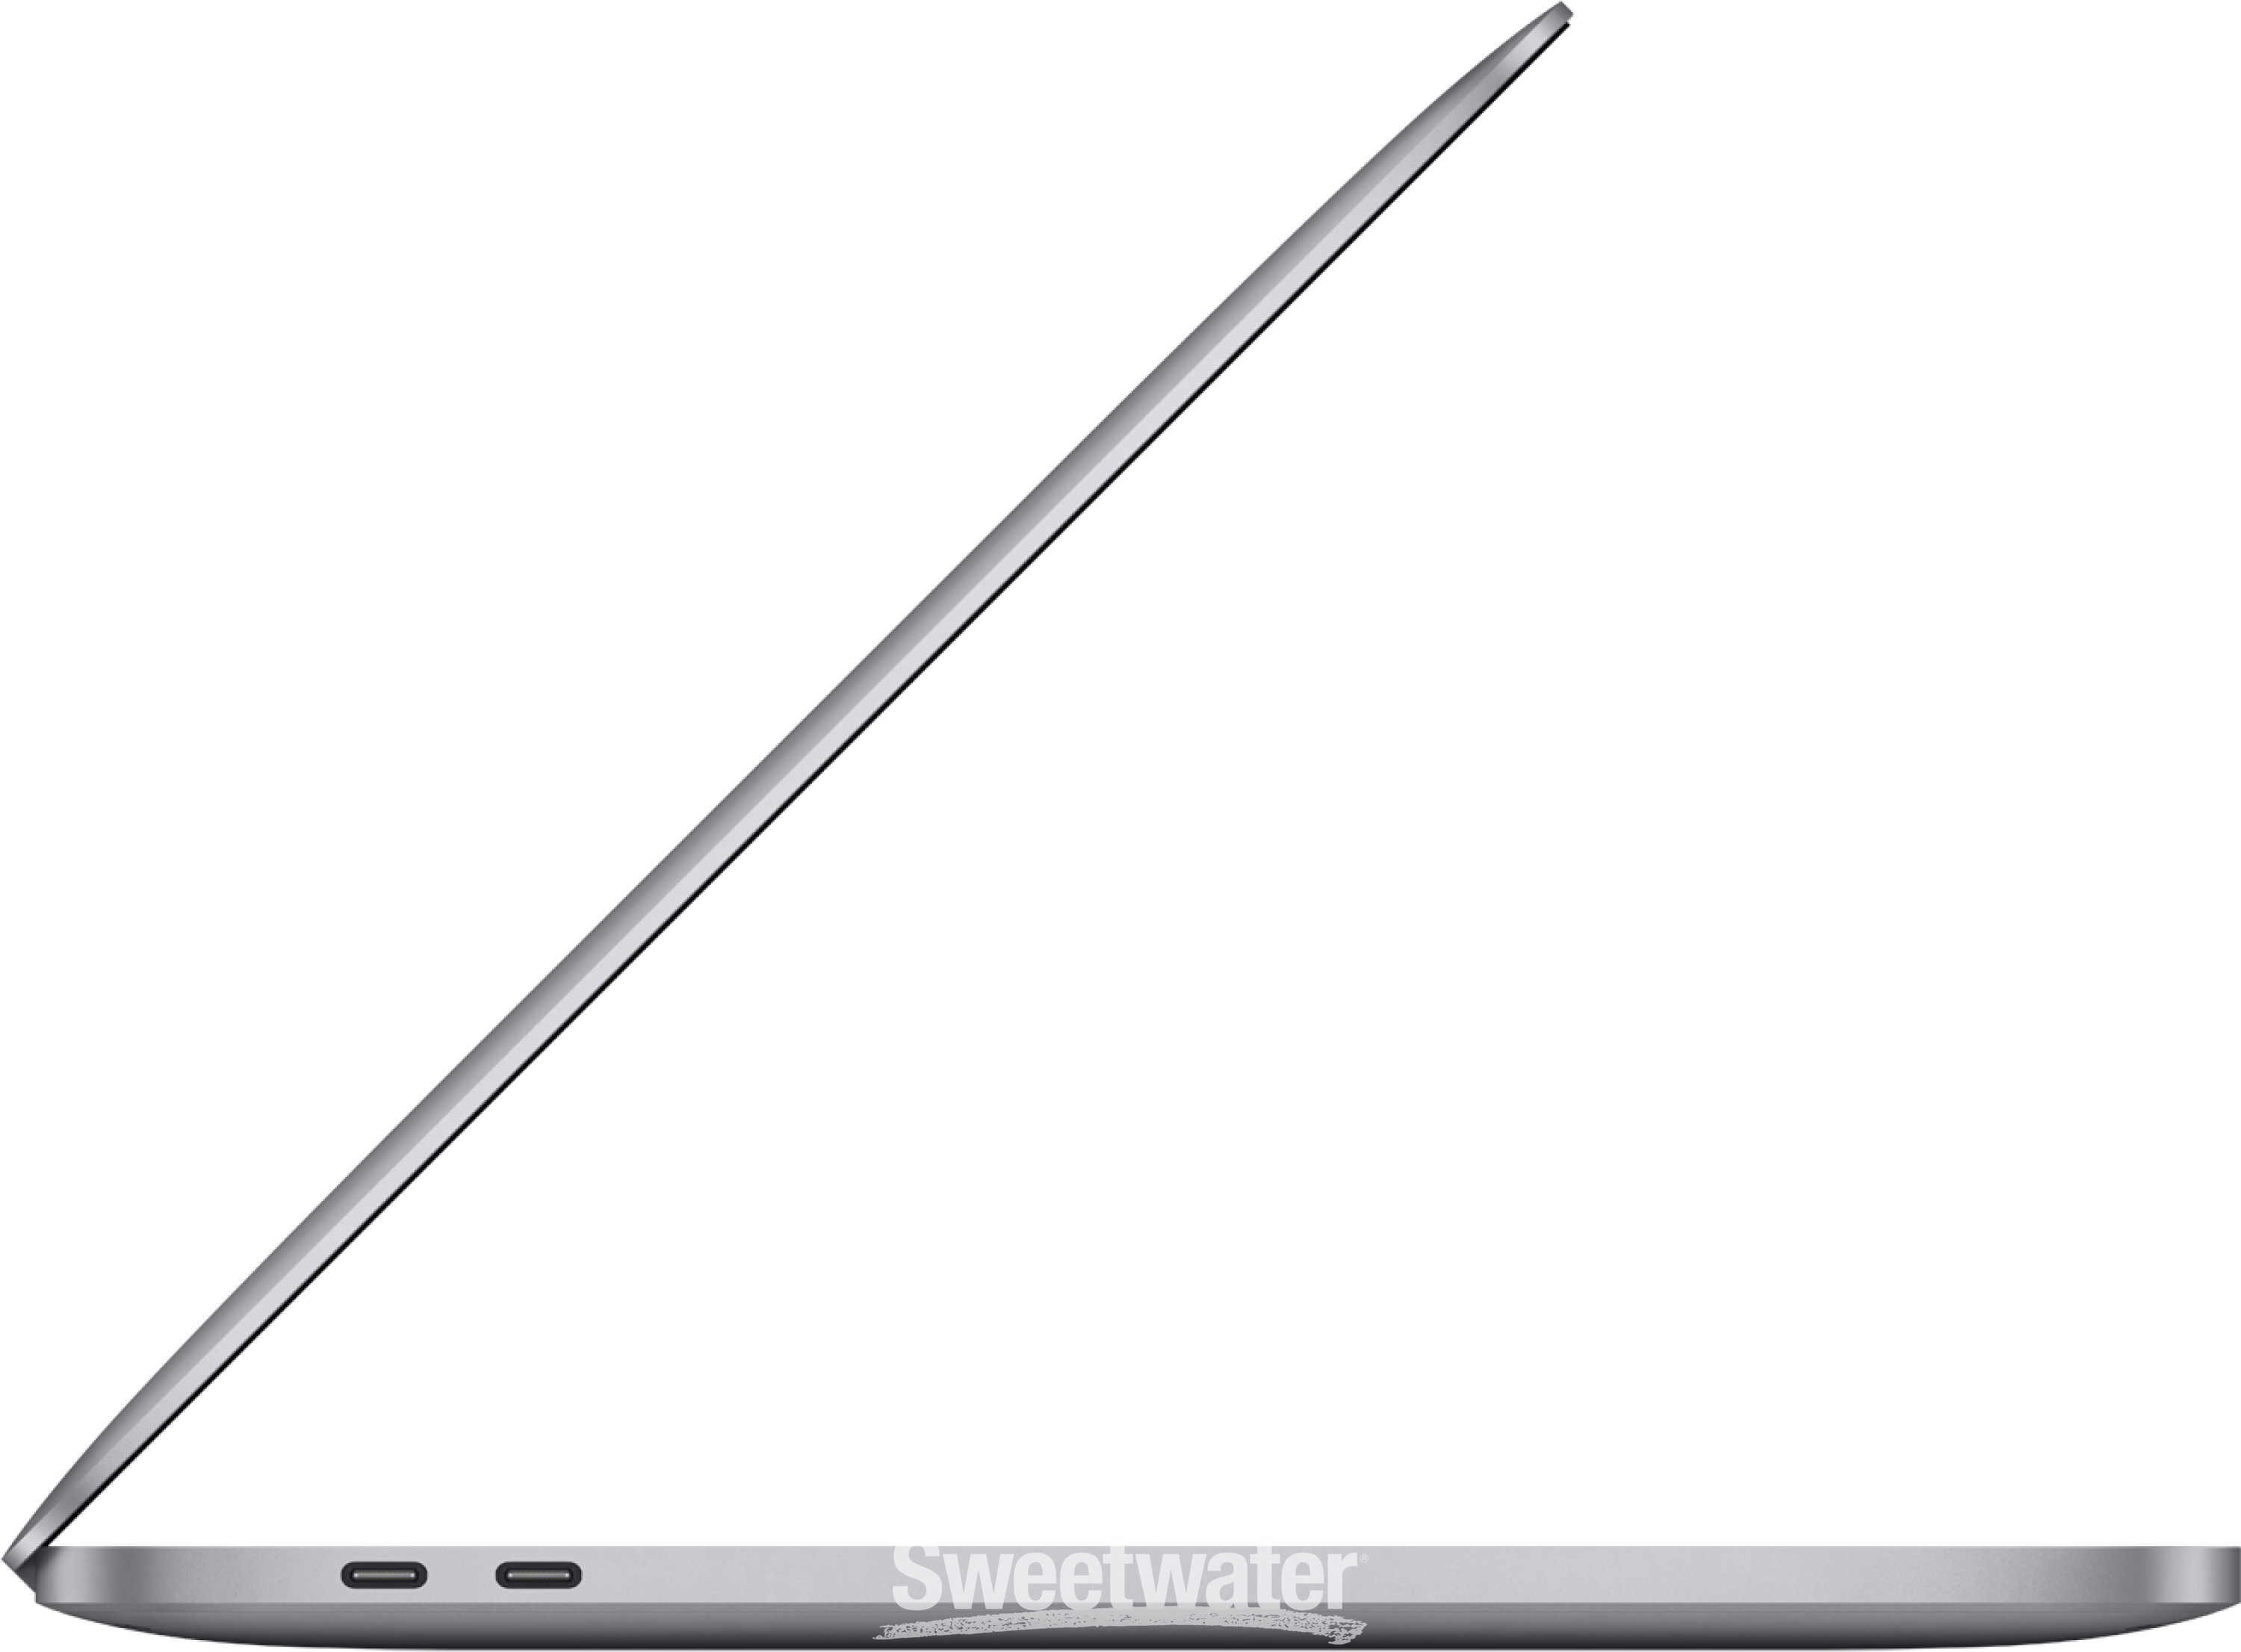 Apple MacBook Pro 13-inch w/Touch Bar 1.4 GHz 4-Core i5 256GB Space Gray |  Sweetwater